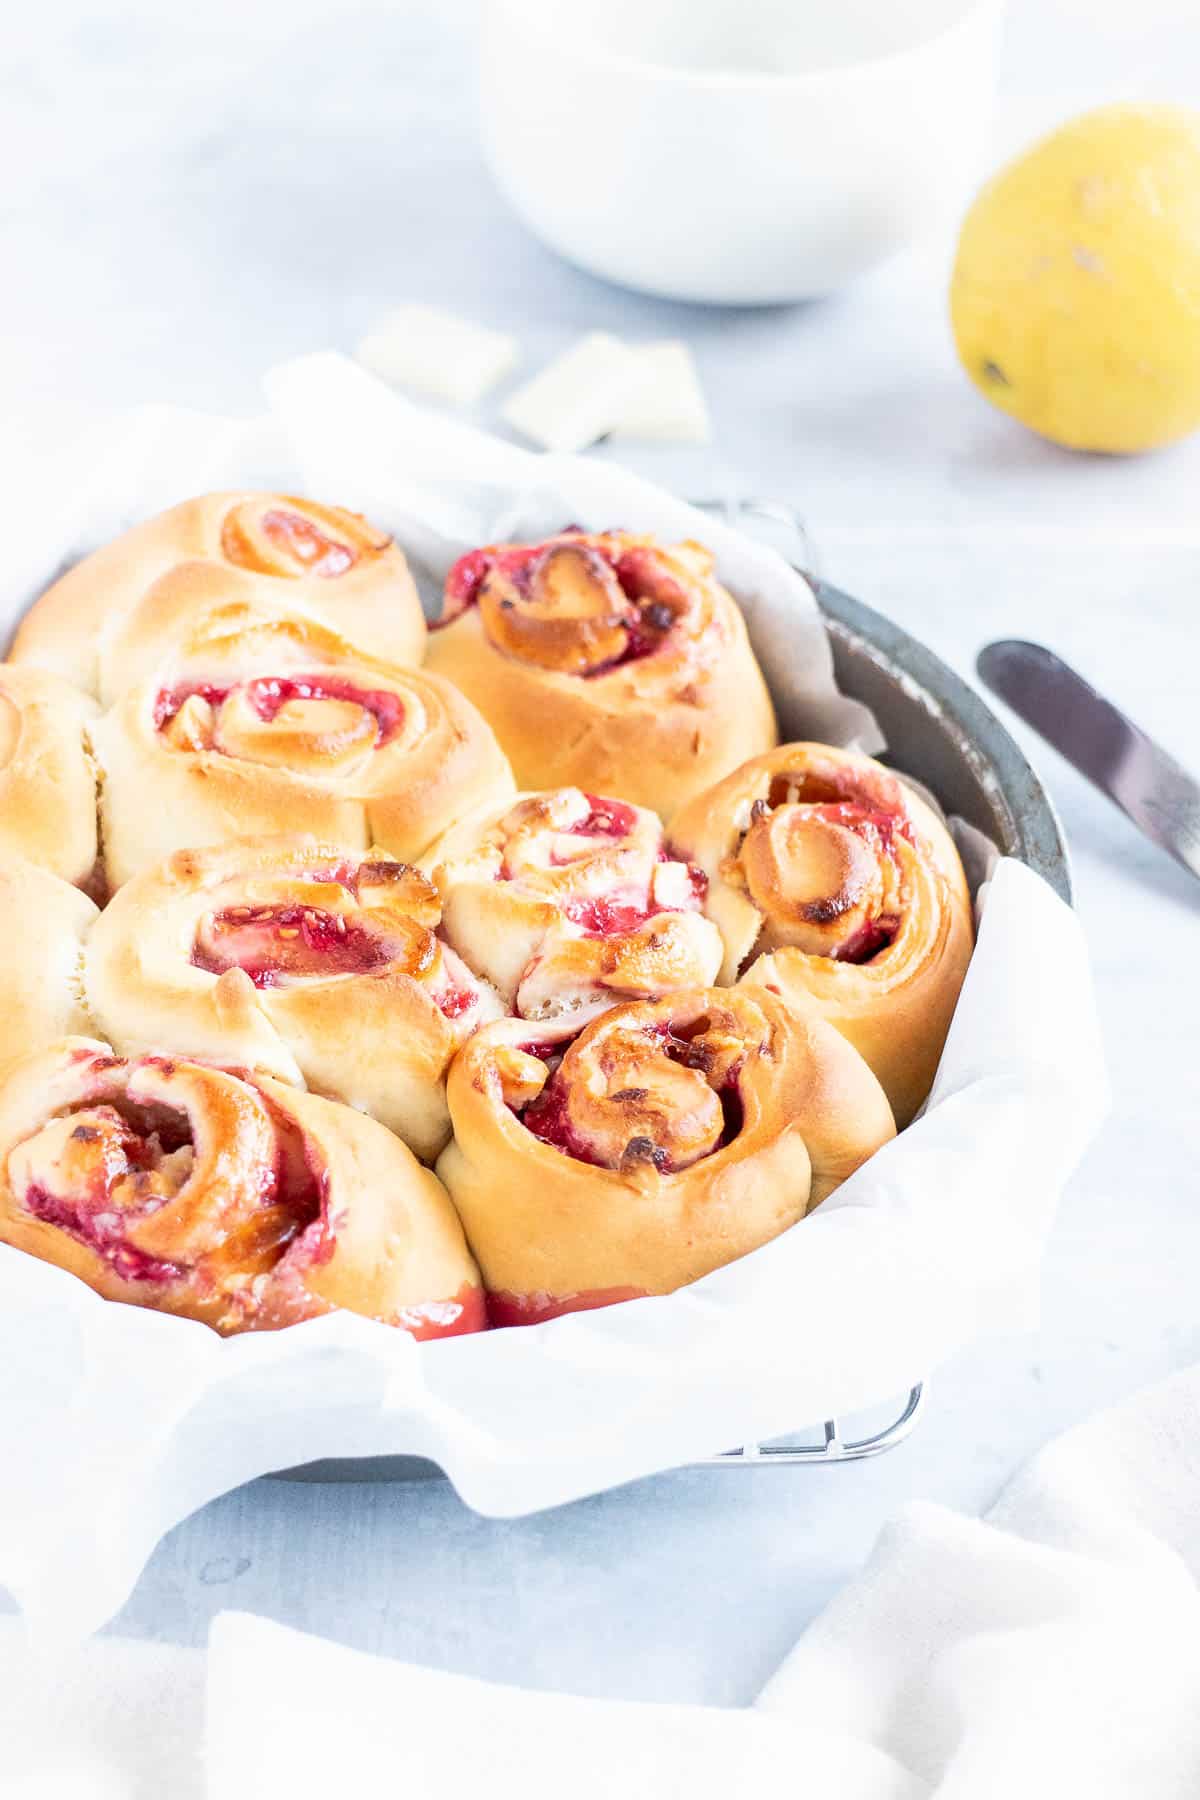 Round cake pan lined with baking paper, and filled with baked raspberry swirl rolls